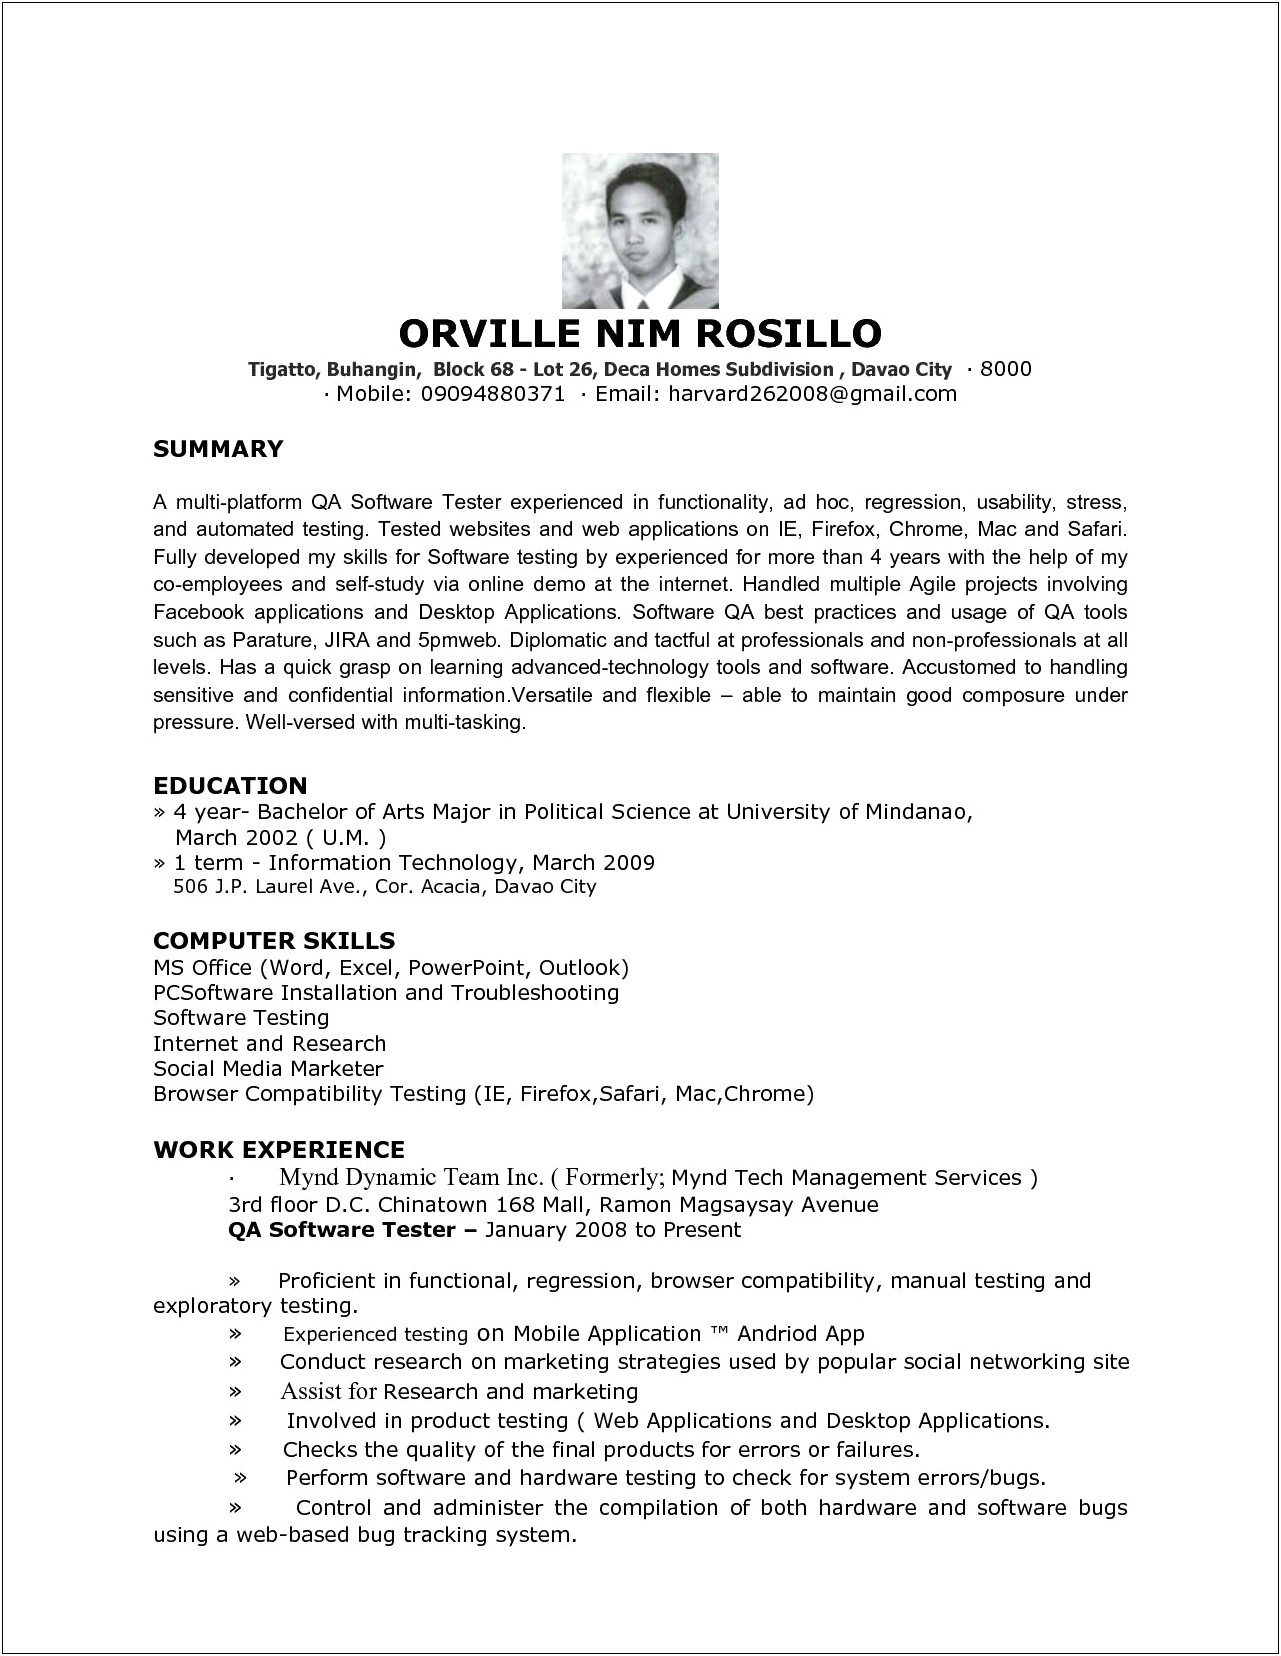 Resume Objective For Entry Level Computer Technician